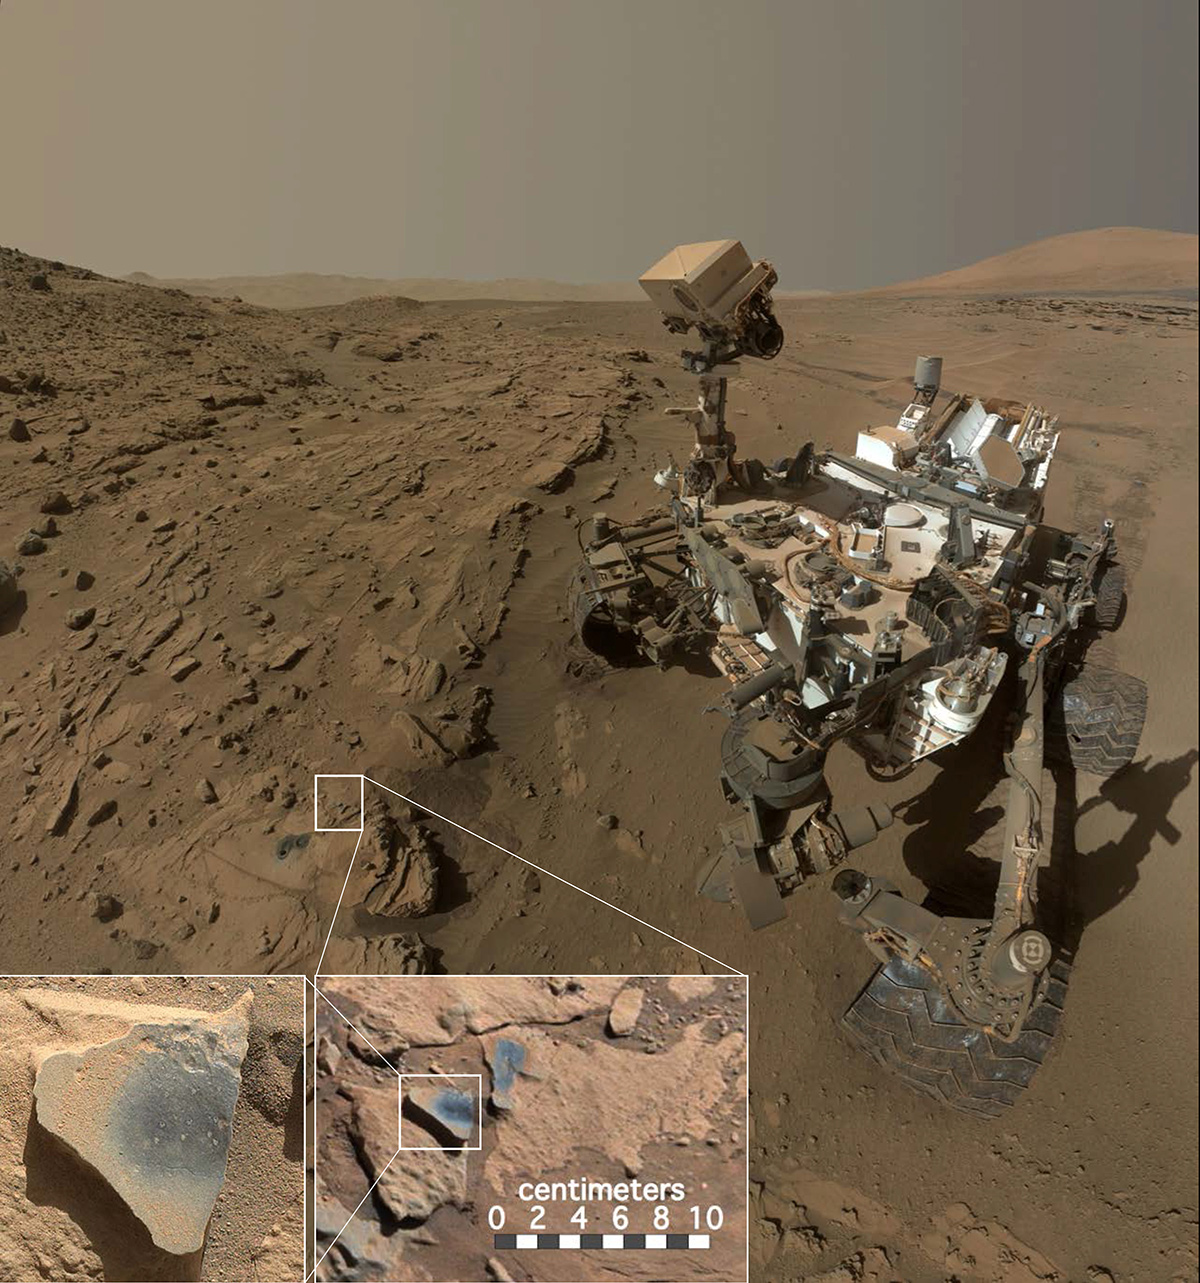 This scene shows NASA's Curiosity Mars rover at a location called "Windjana," where the rover found rocks containing manganese-oxide minerals, which require abundant water and strongly oxidizing conditions to form.